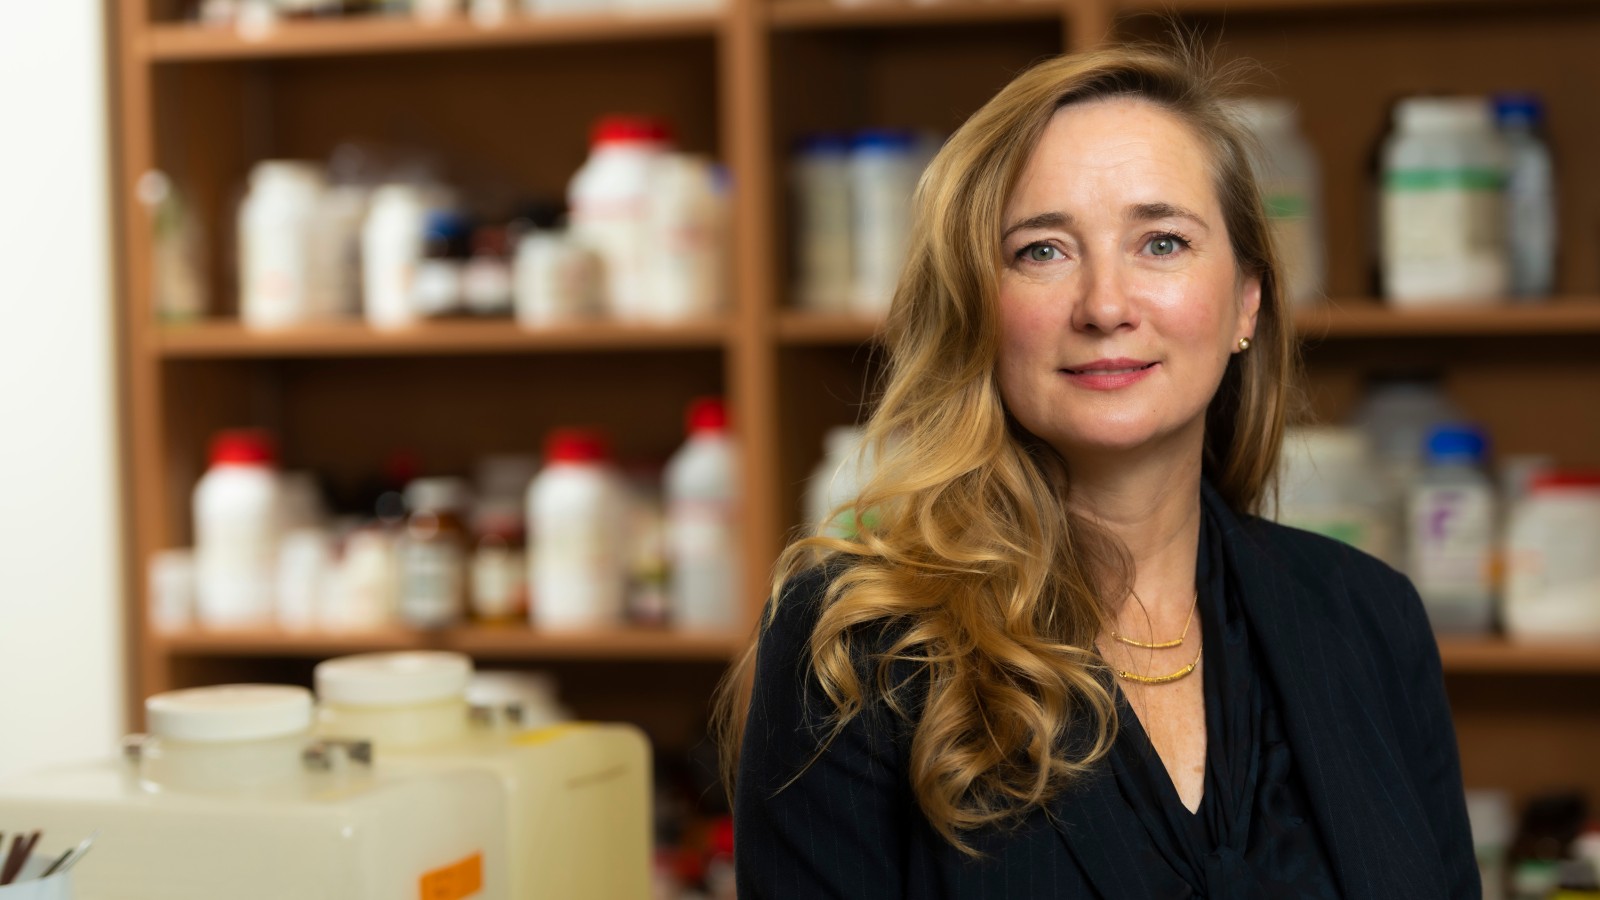 Biochemistry professor Joanne Lemieux leads a U of A team that identified promising compounds known as protease inhibitors that interfere with the SARS-CoV-2 virus's ability to replicate — potentially pointing the way to new antiviral treatments that would be more effective with fewer toxic side-effects. (Photo: John Ulan)